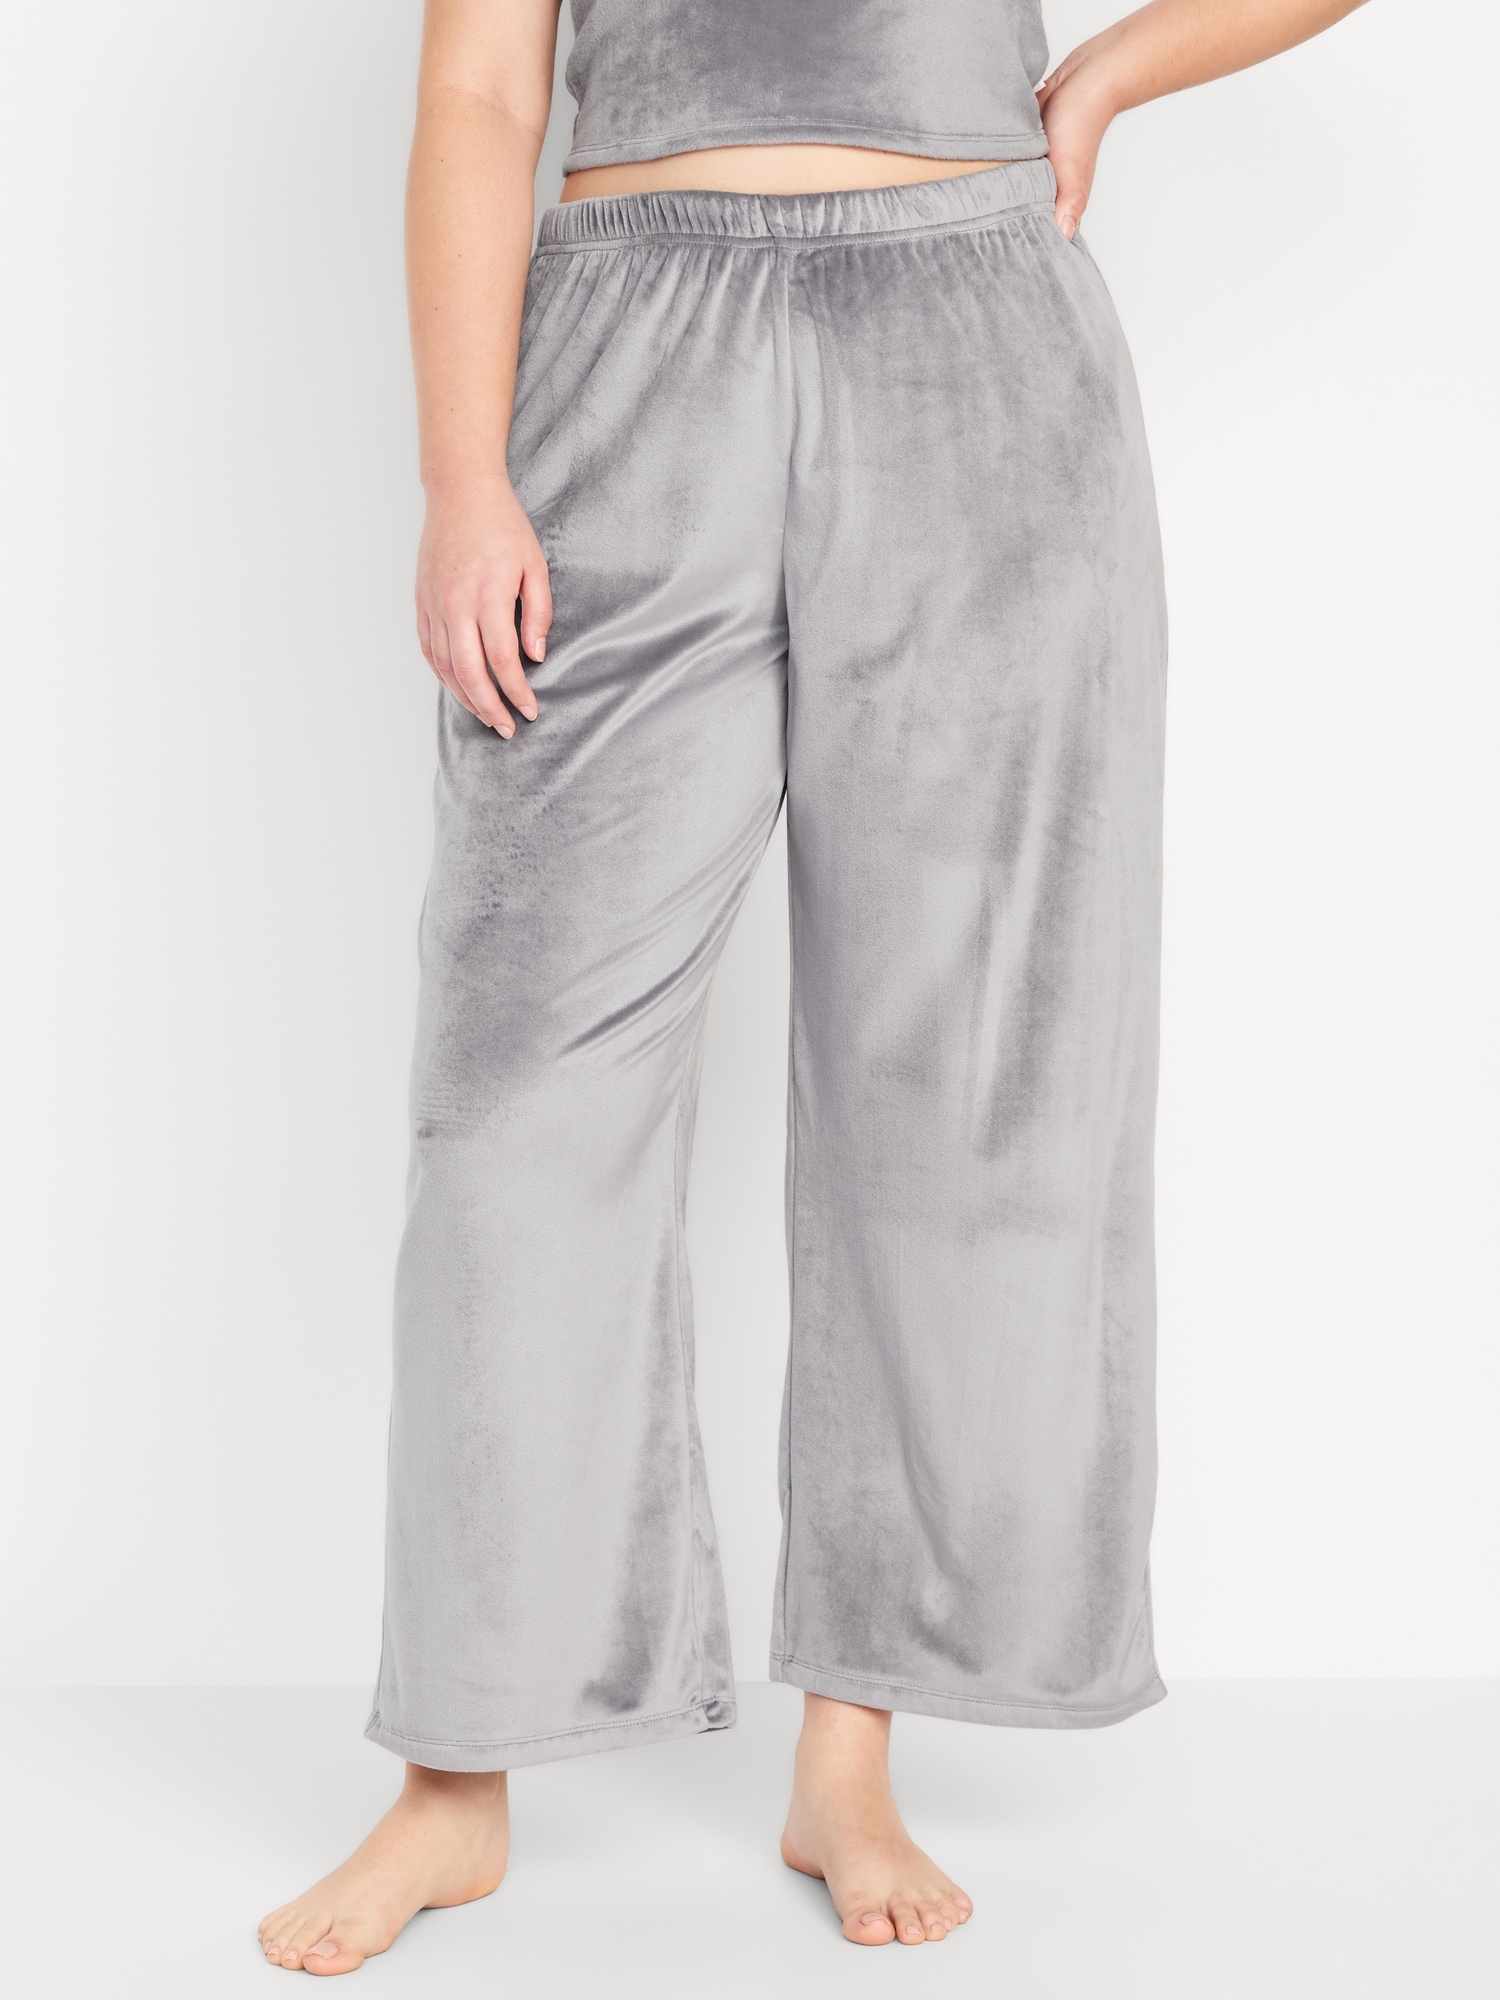 High-Waisted Velour Pajama Pants for Women | Old Navy